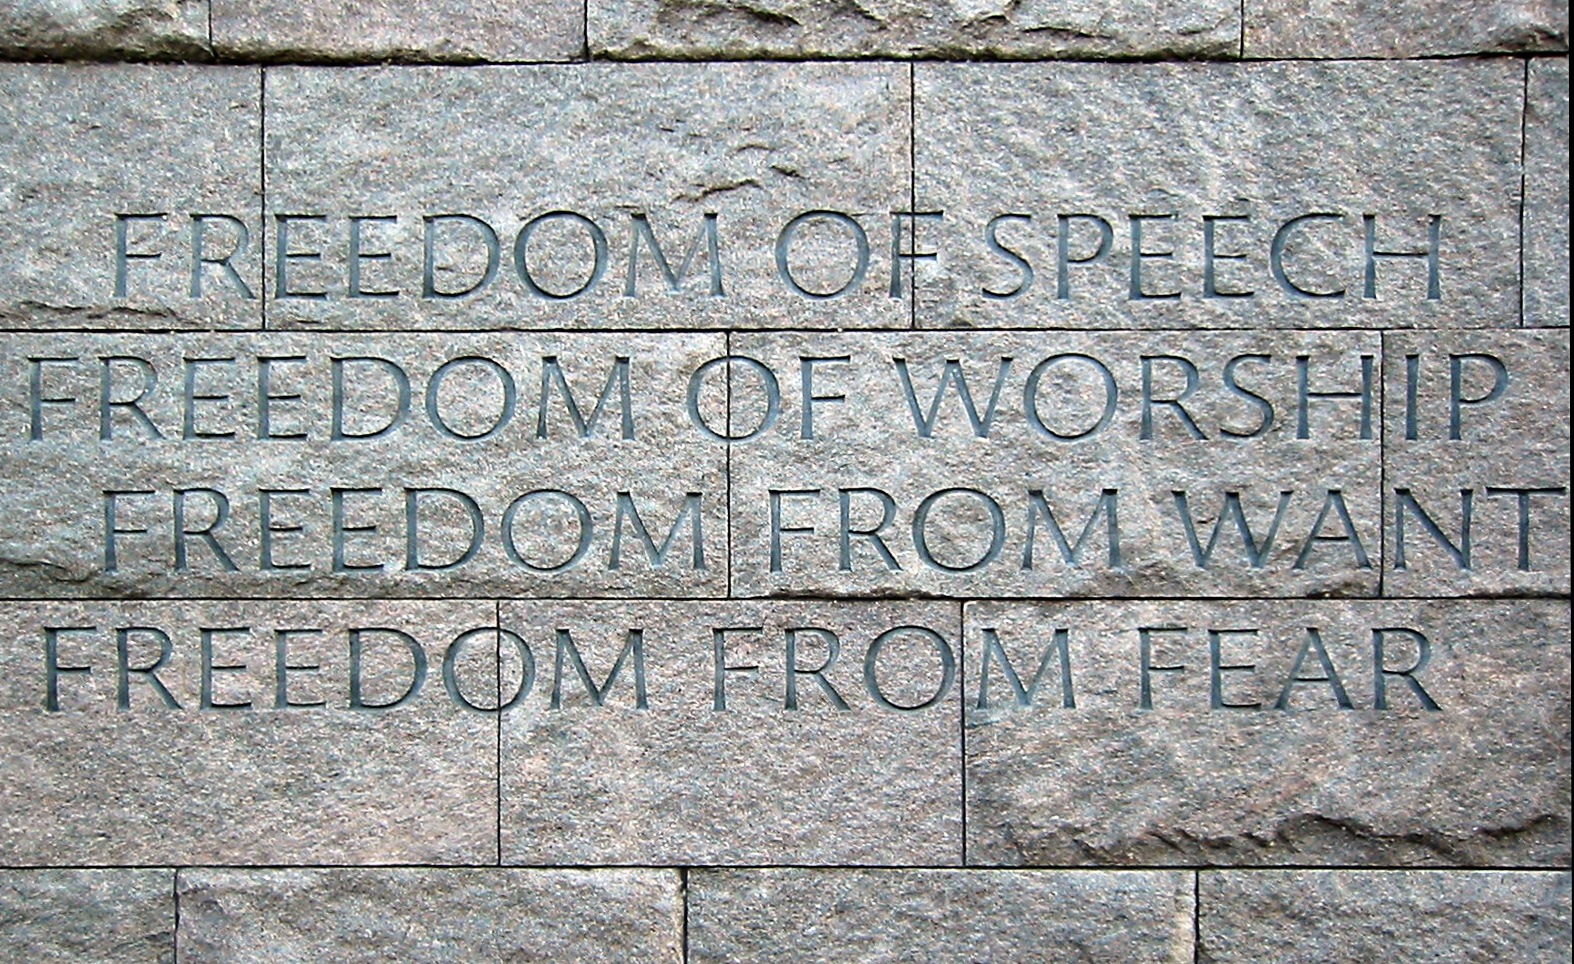 The Four Freedoms were goals articulated by United States President Franklin D. Roosevelt on January 6, 1941. In an address known as the Four Freedoms speech (technically the 1941 State of the Union address), he proposed four fundamental freedoms that people "everywhere in the world" ought to enjoy: Freedom of speech Freedom of worship Freedom from want Freedom from fear